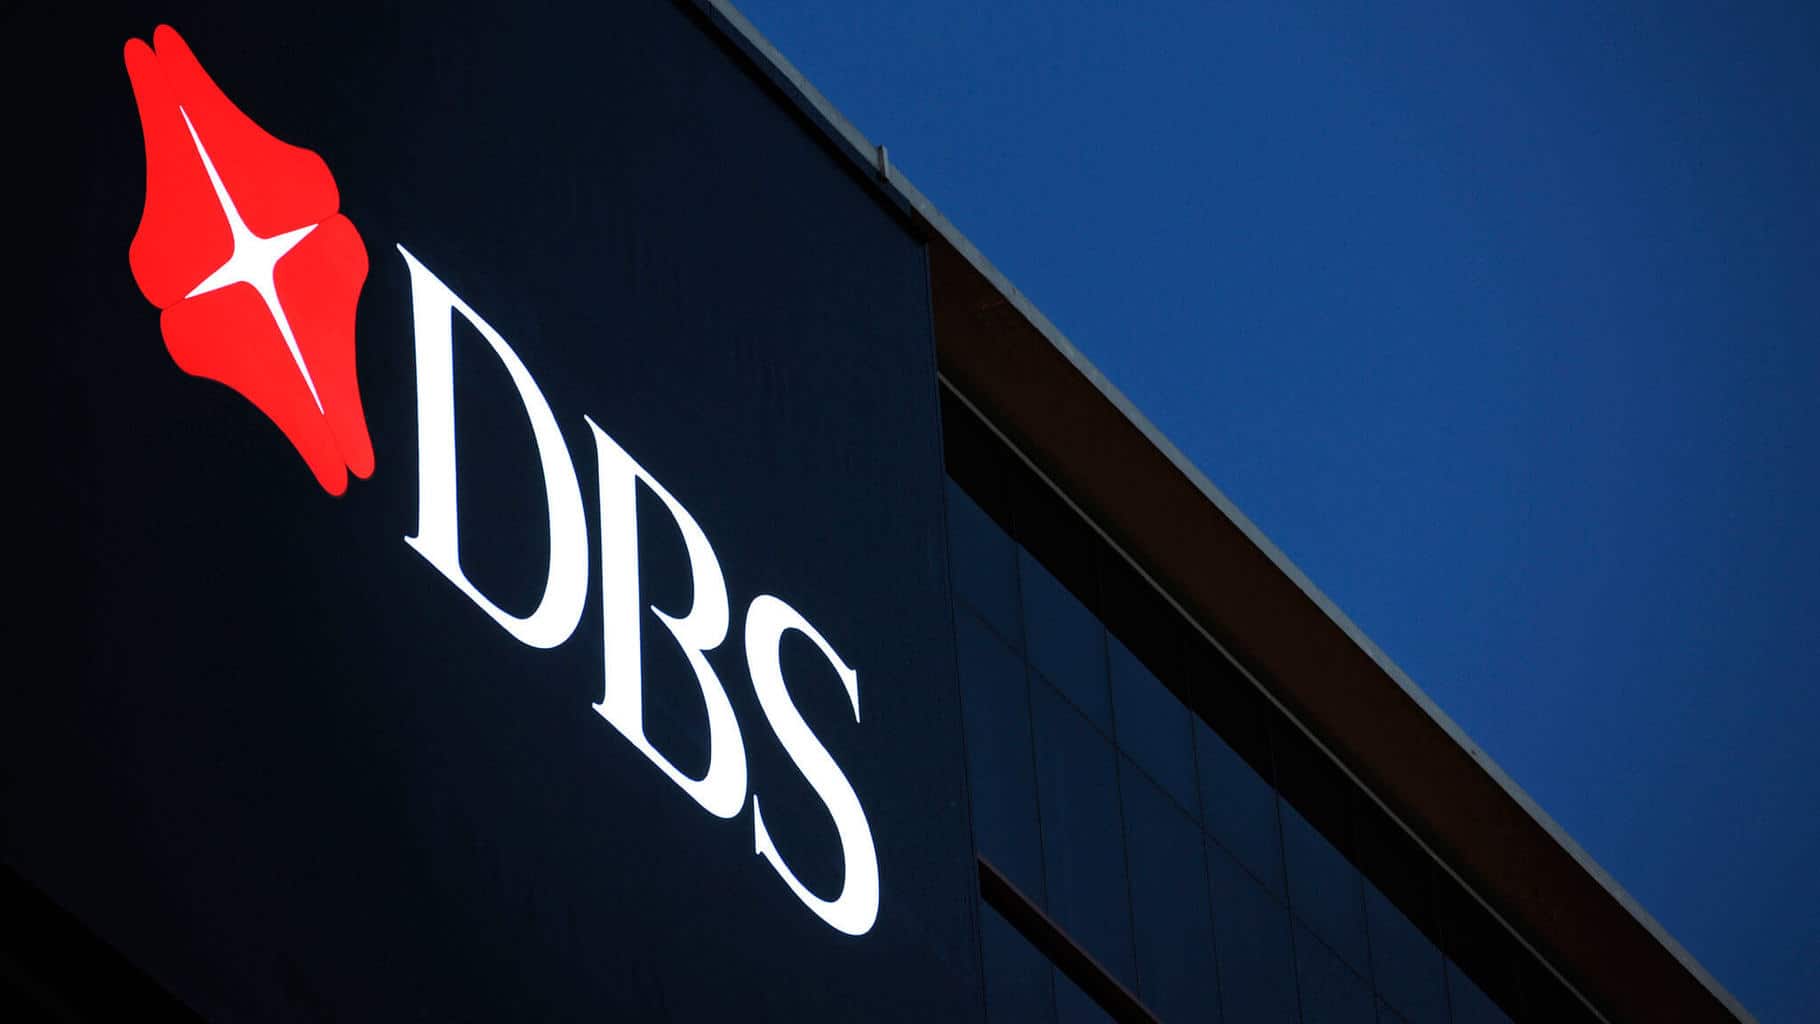 DBS Bank Expects a Boost in Chinese P2P Lending Market from the Greater Bay Area